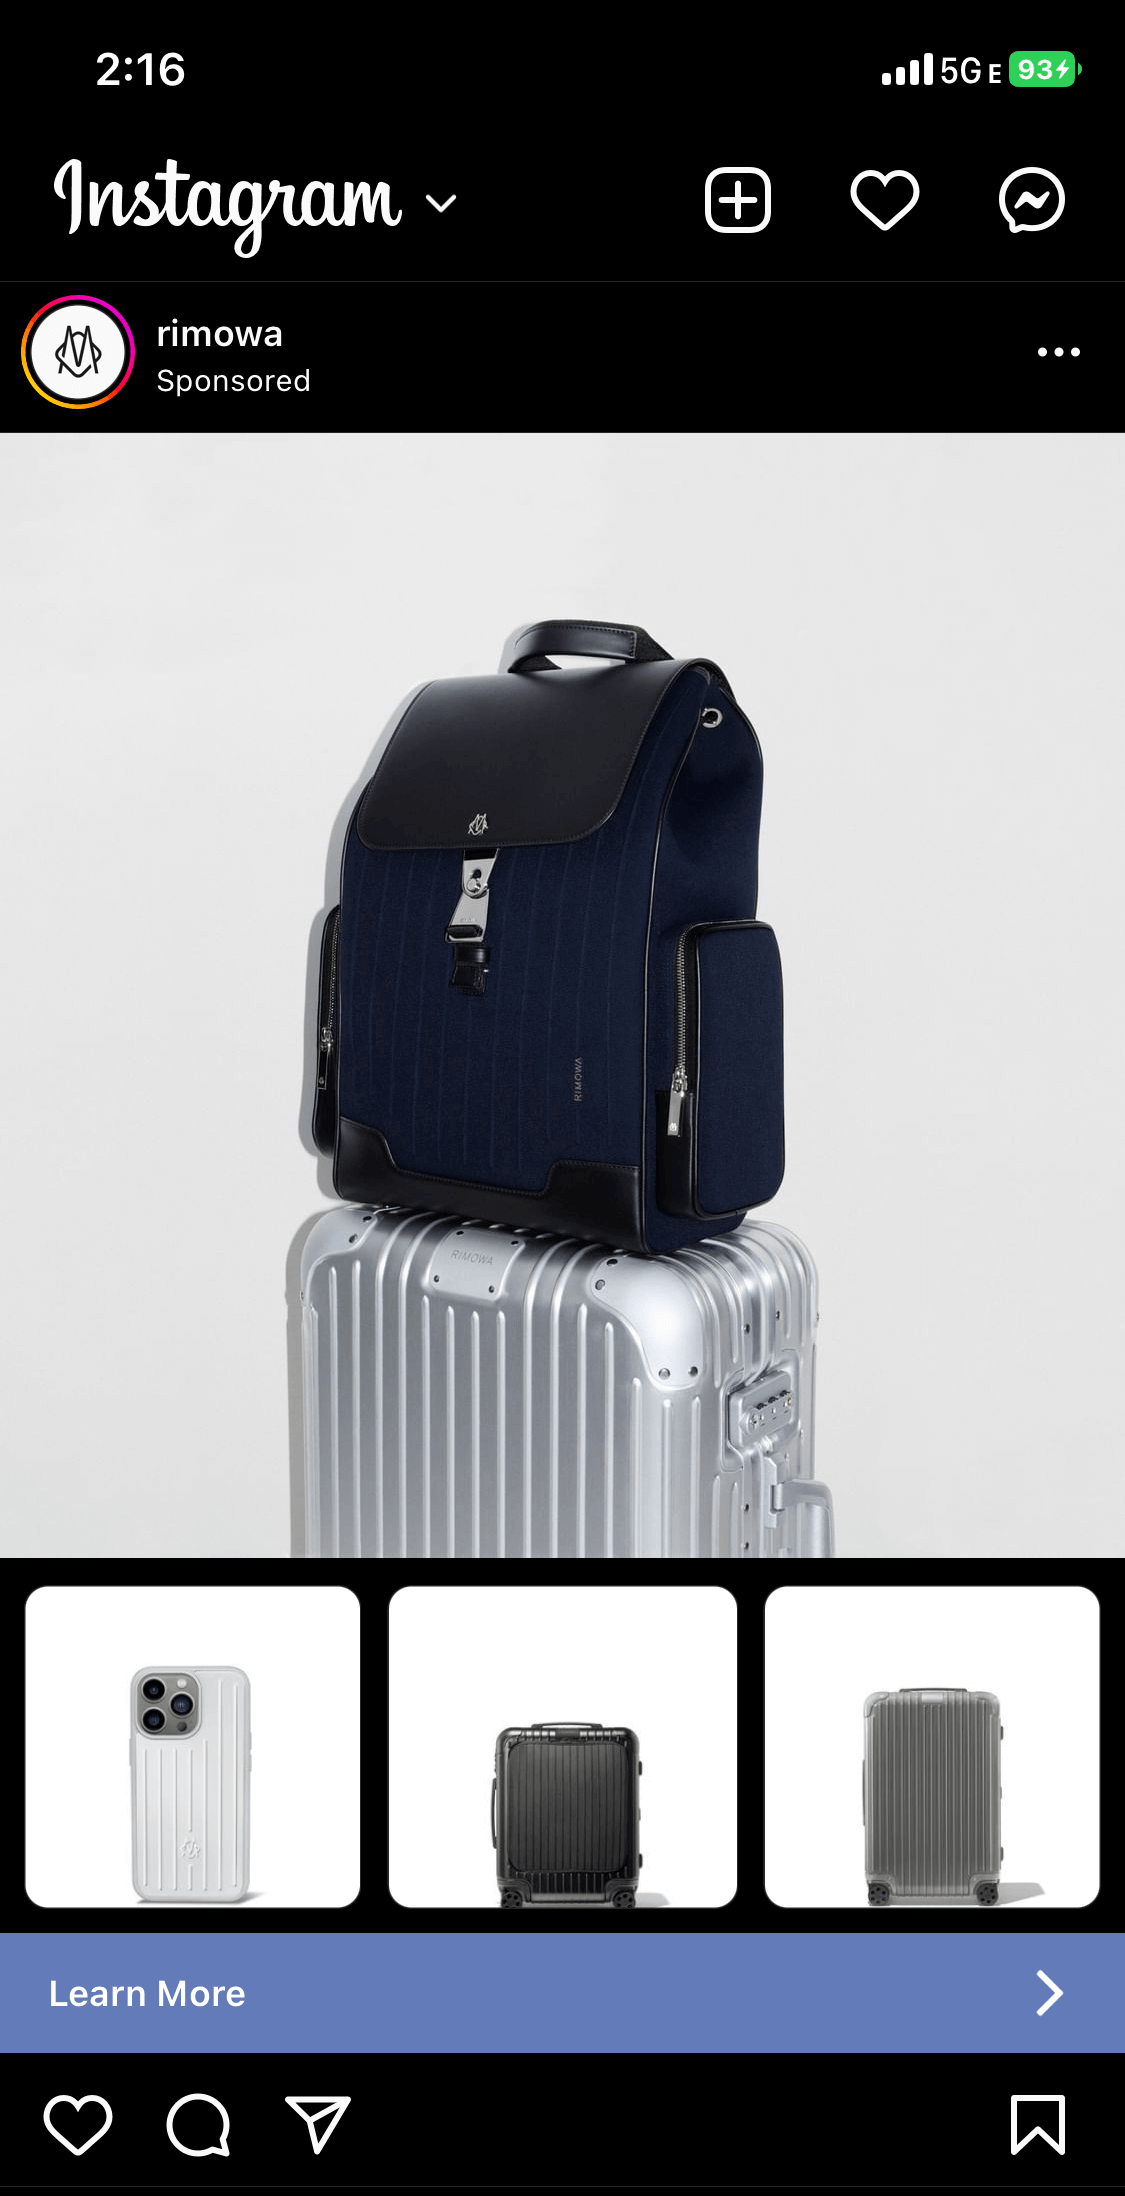 instagram screenshot of rimowa suggested post black backpack resting on silver aluminum suitcase